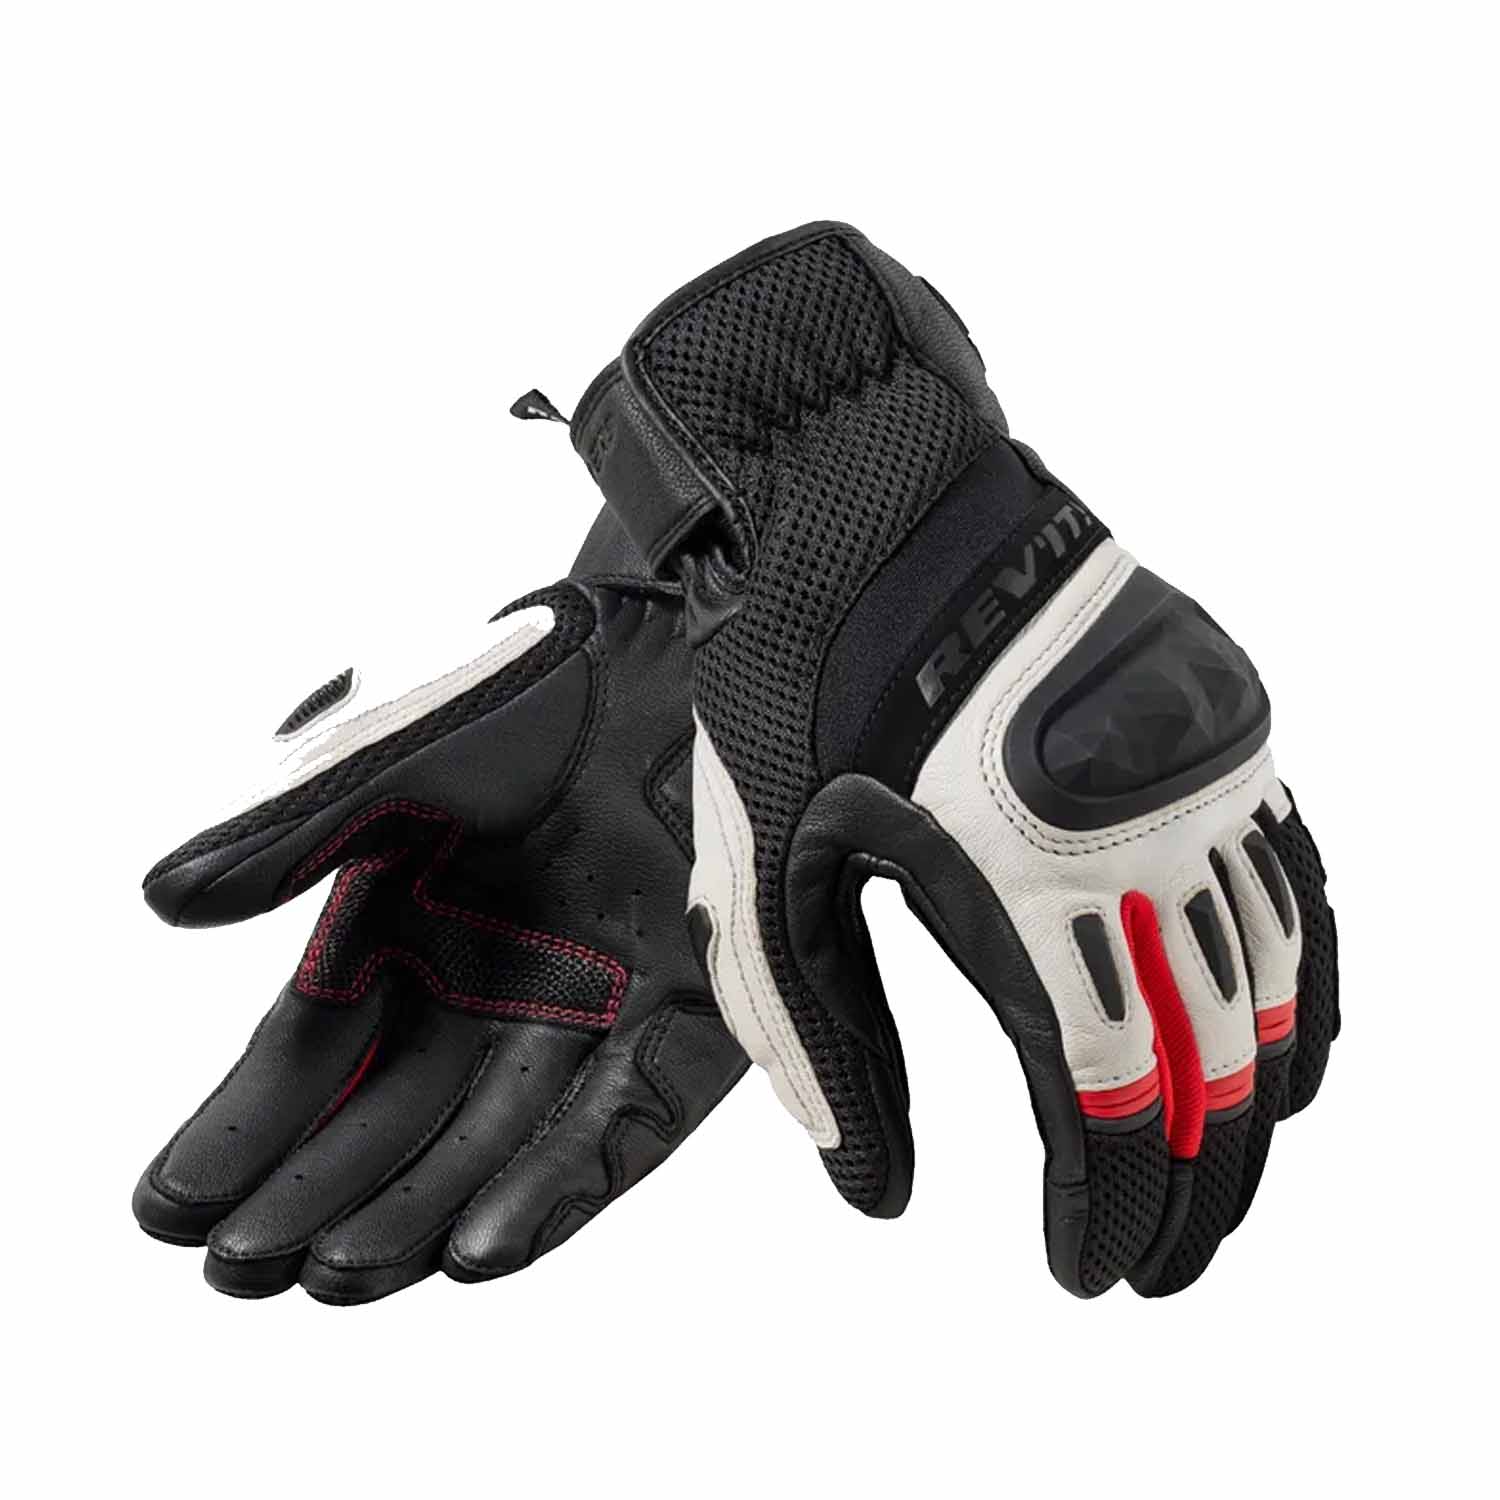 Image of EU REV'IT! Dirt 4 Gloves Black Red Taille XL